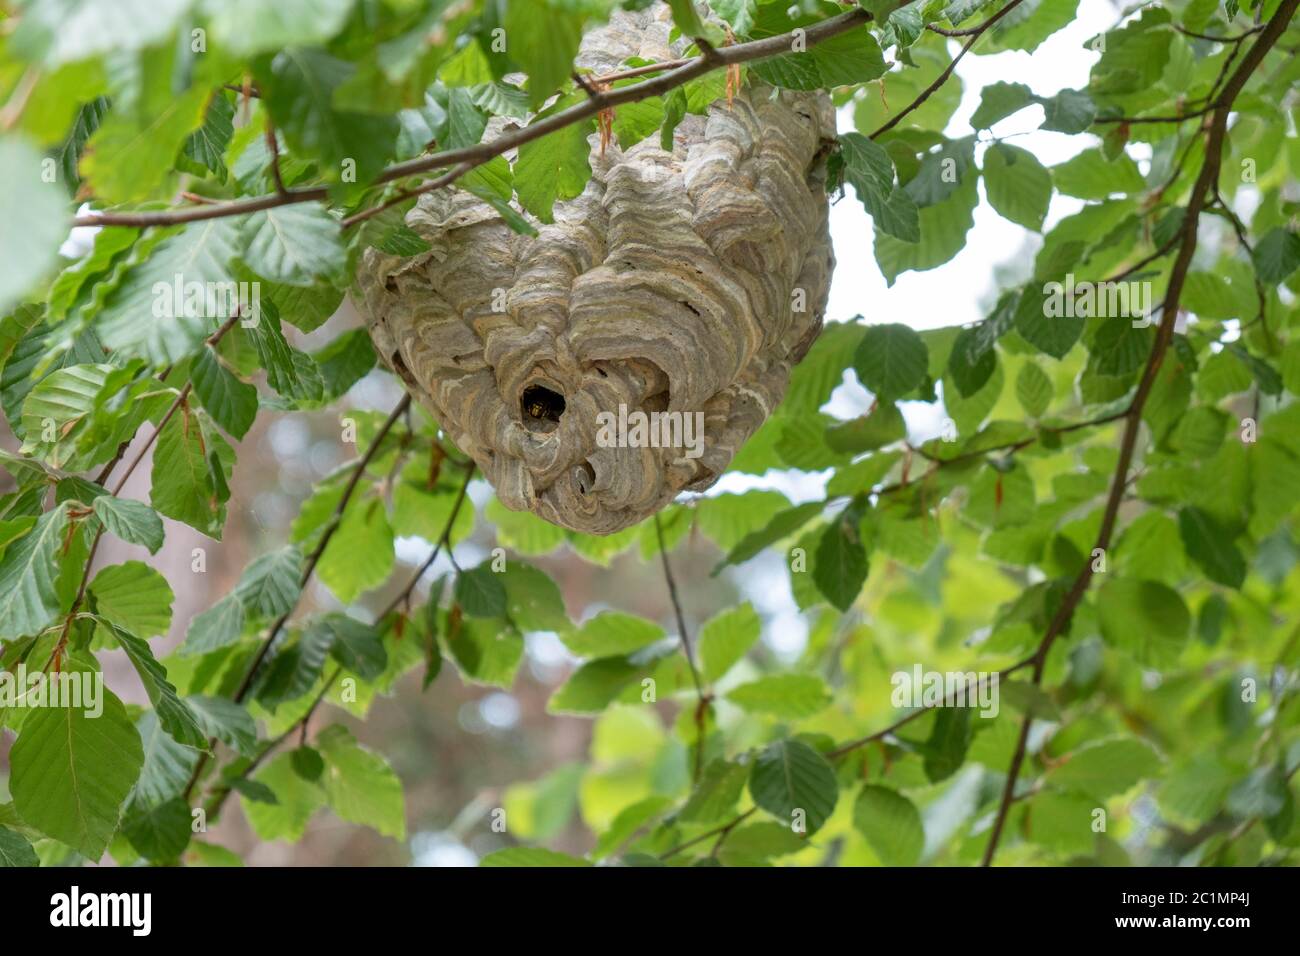 a large wasp nest hidden in the tree Stock Photo